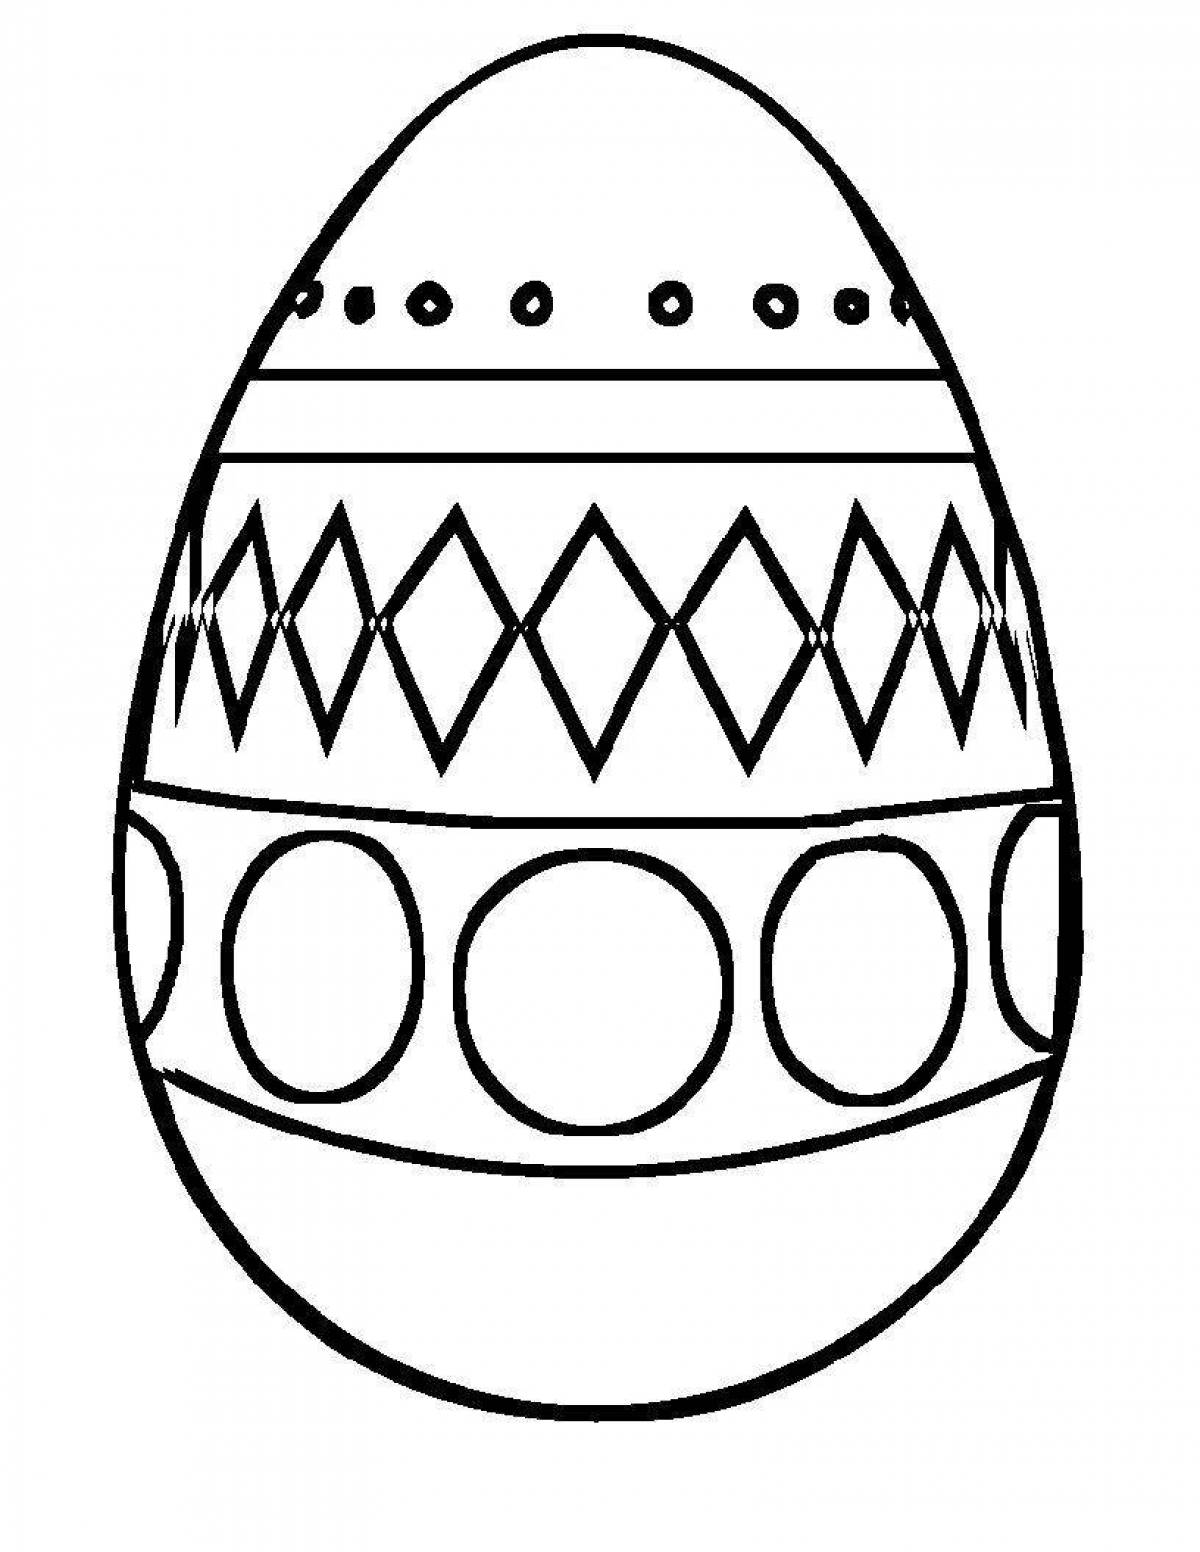 Playful testicles coloring page